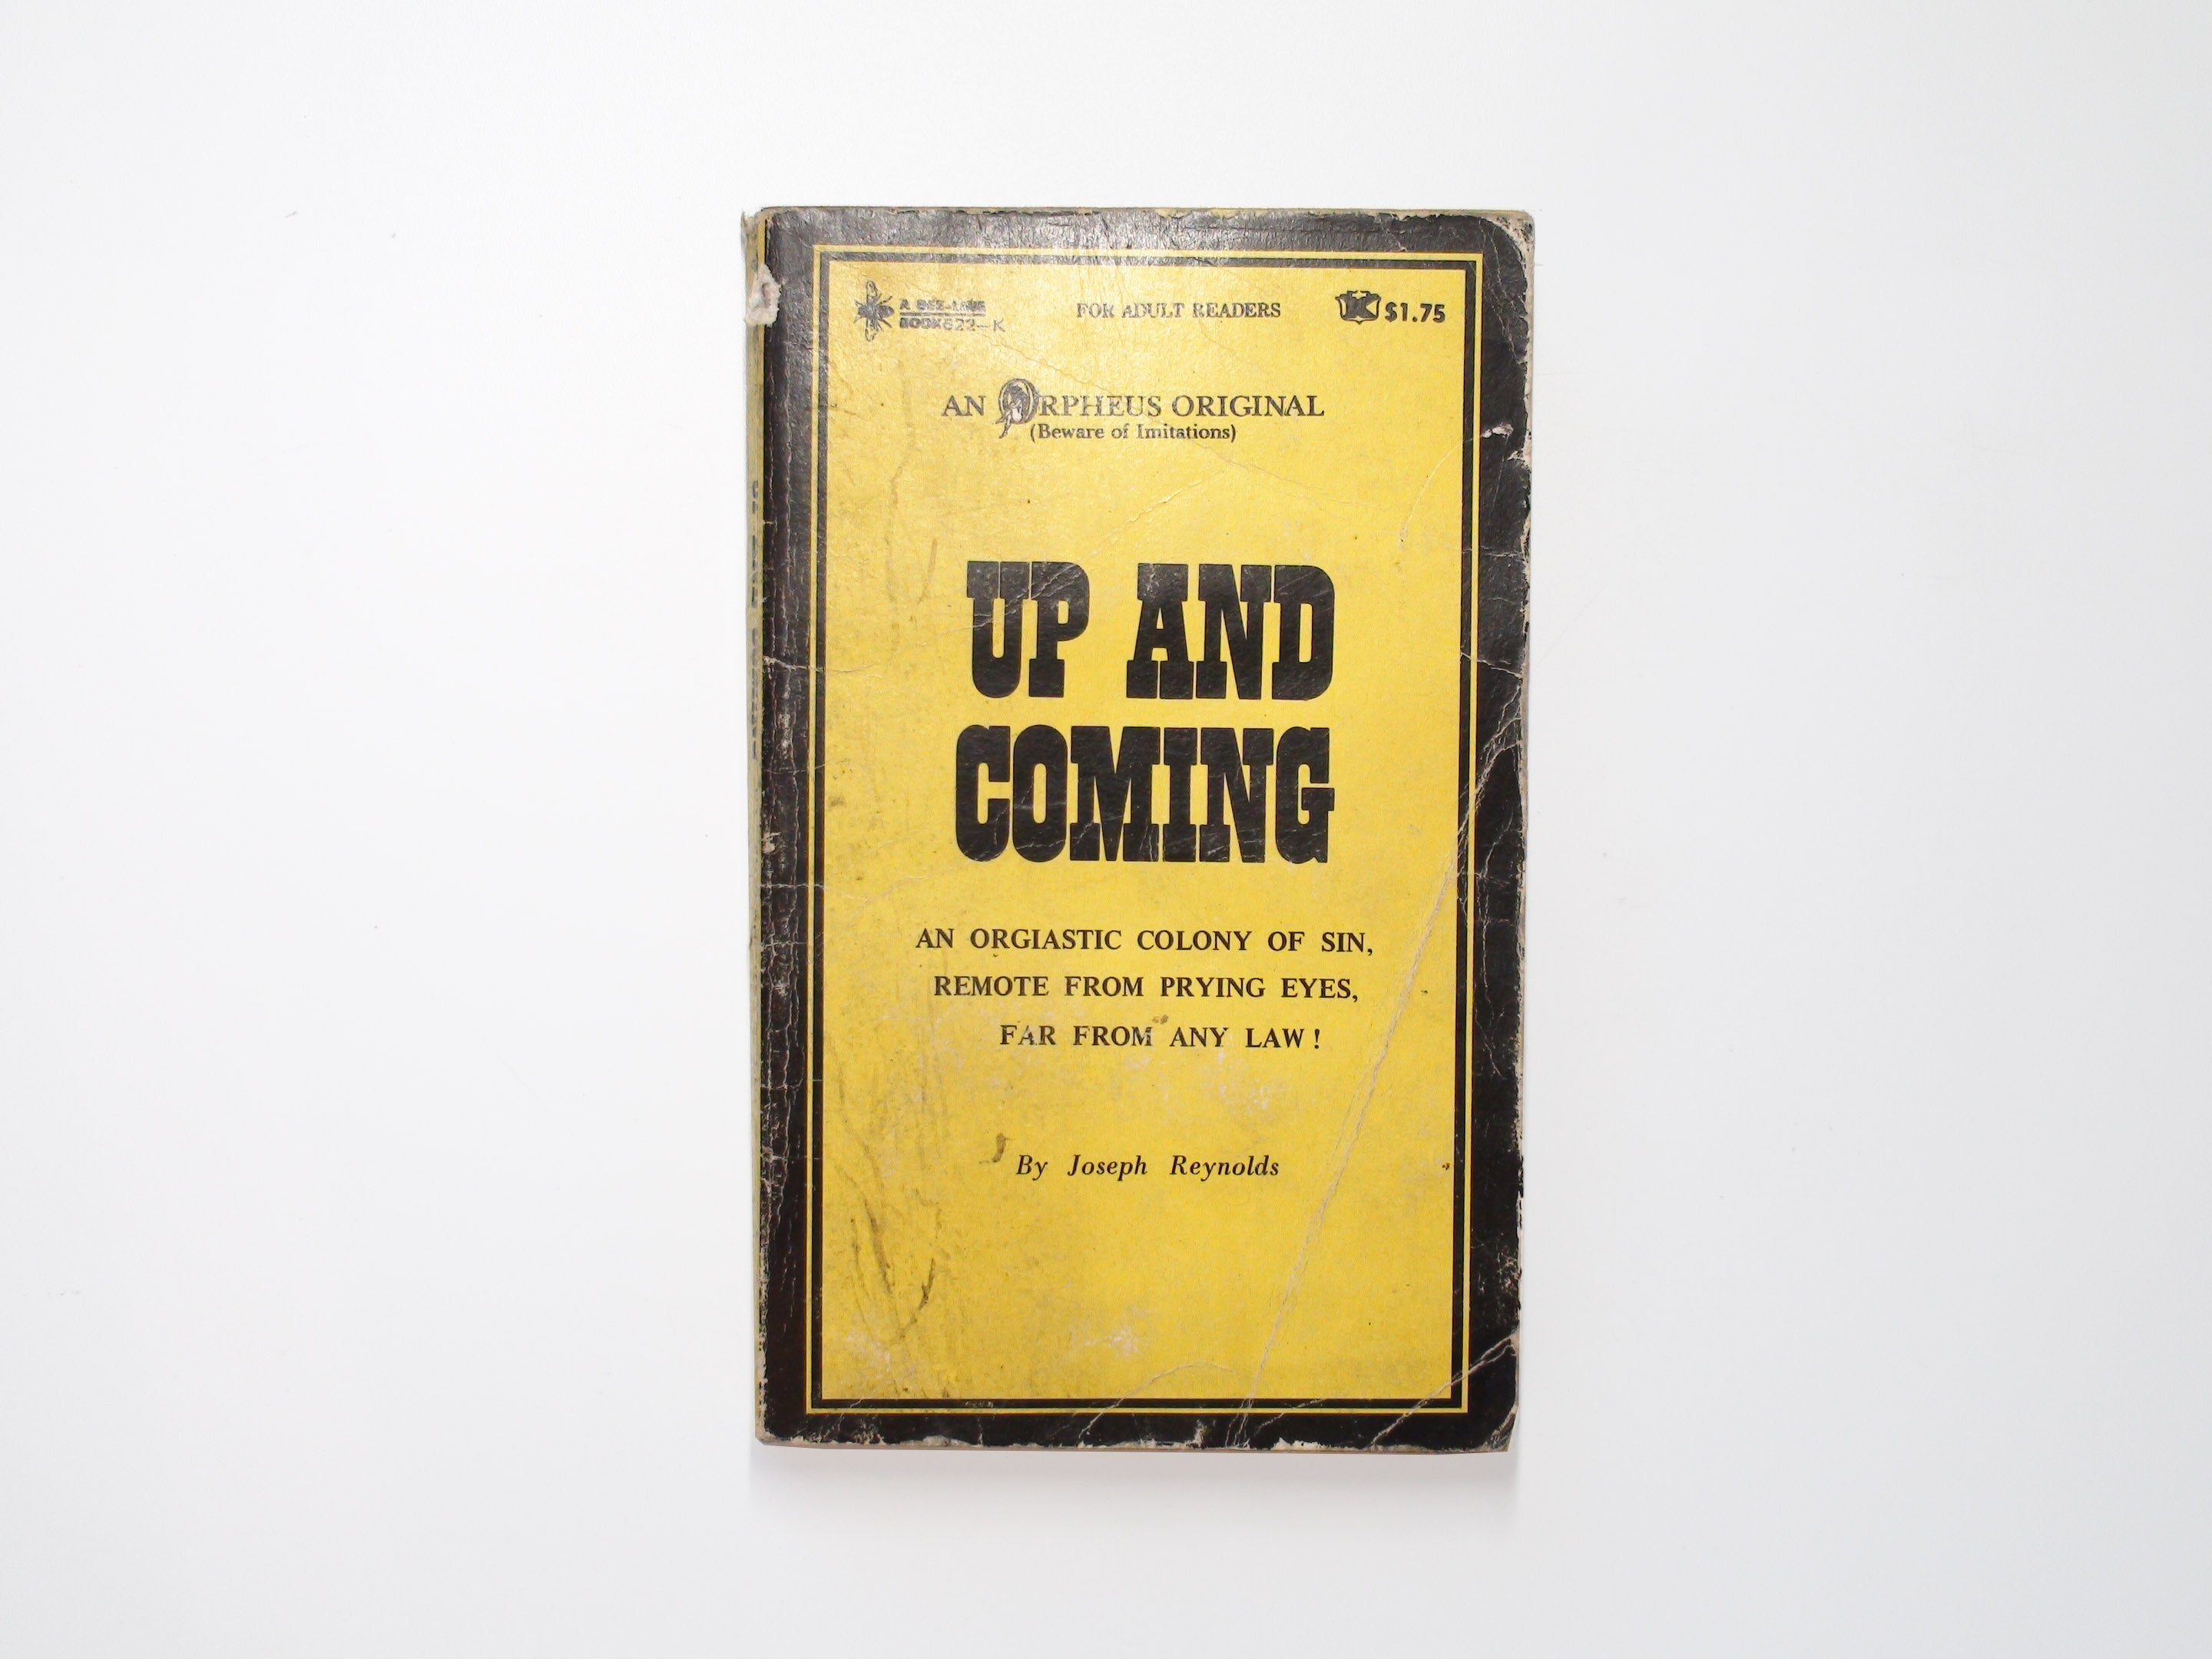 Up and Coming, by Joseph Reynolds, An Orpheus Original Erotic Novel, 1970